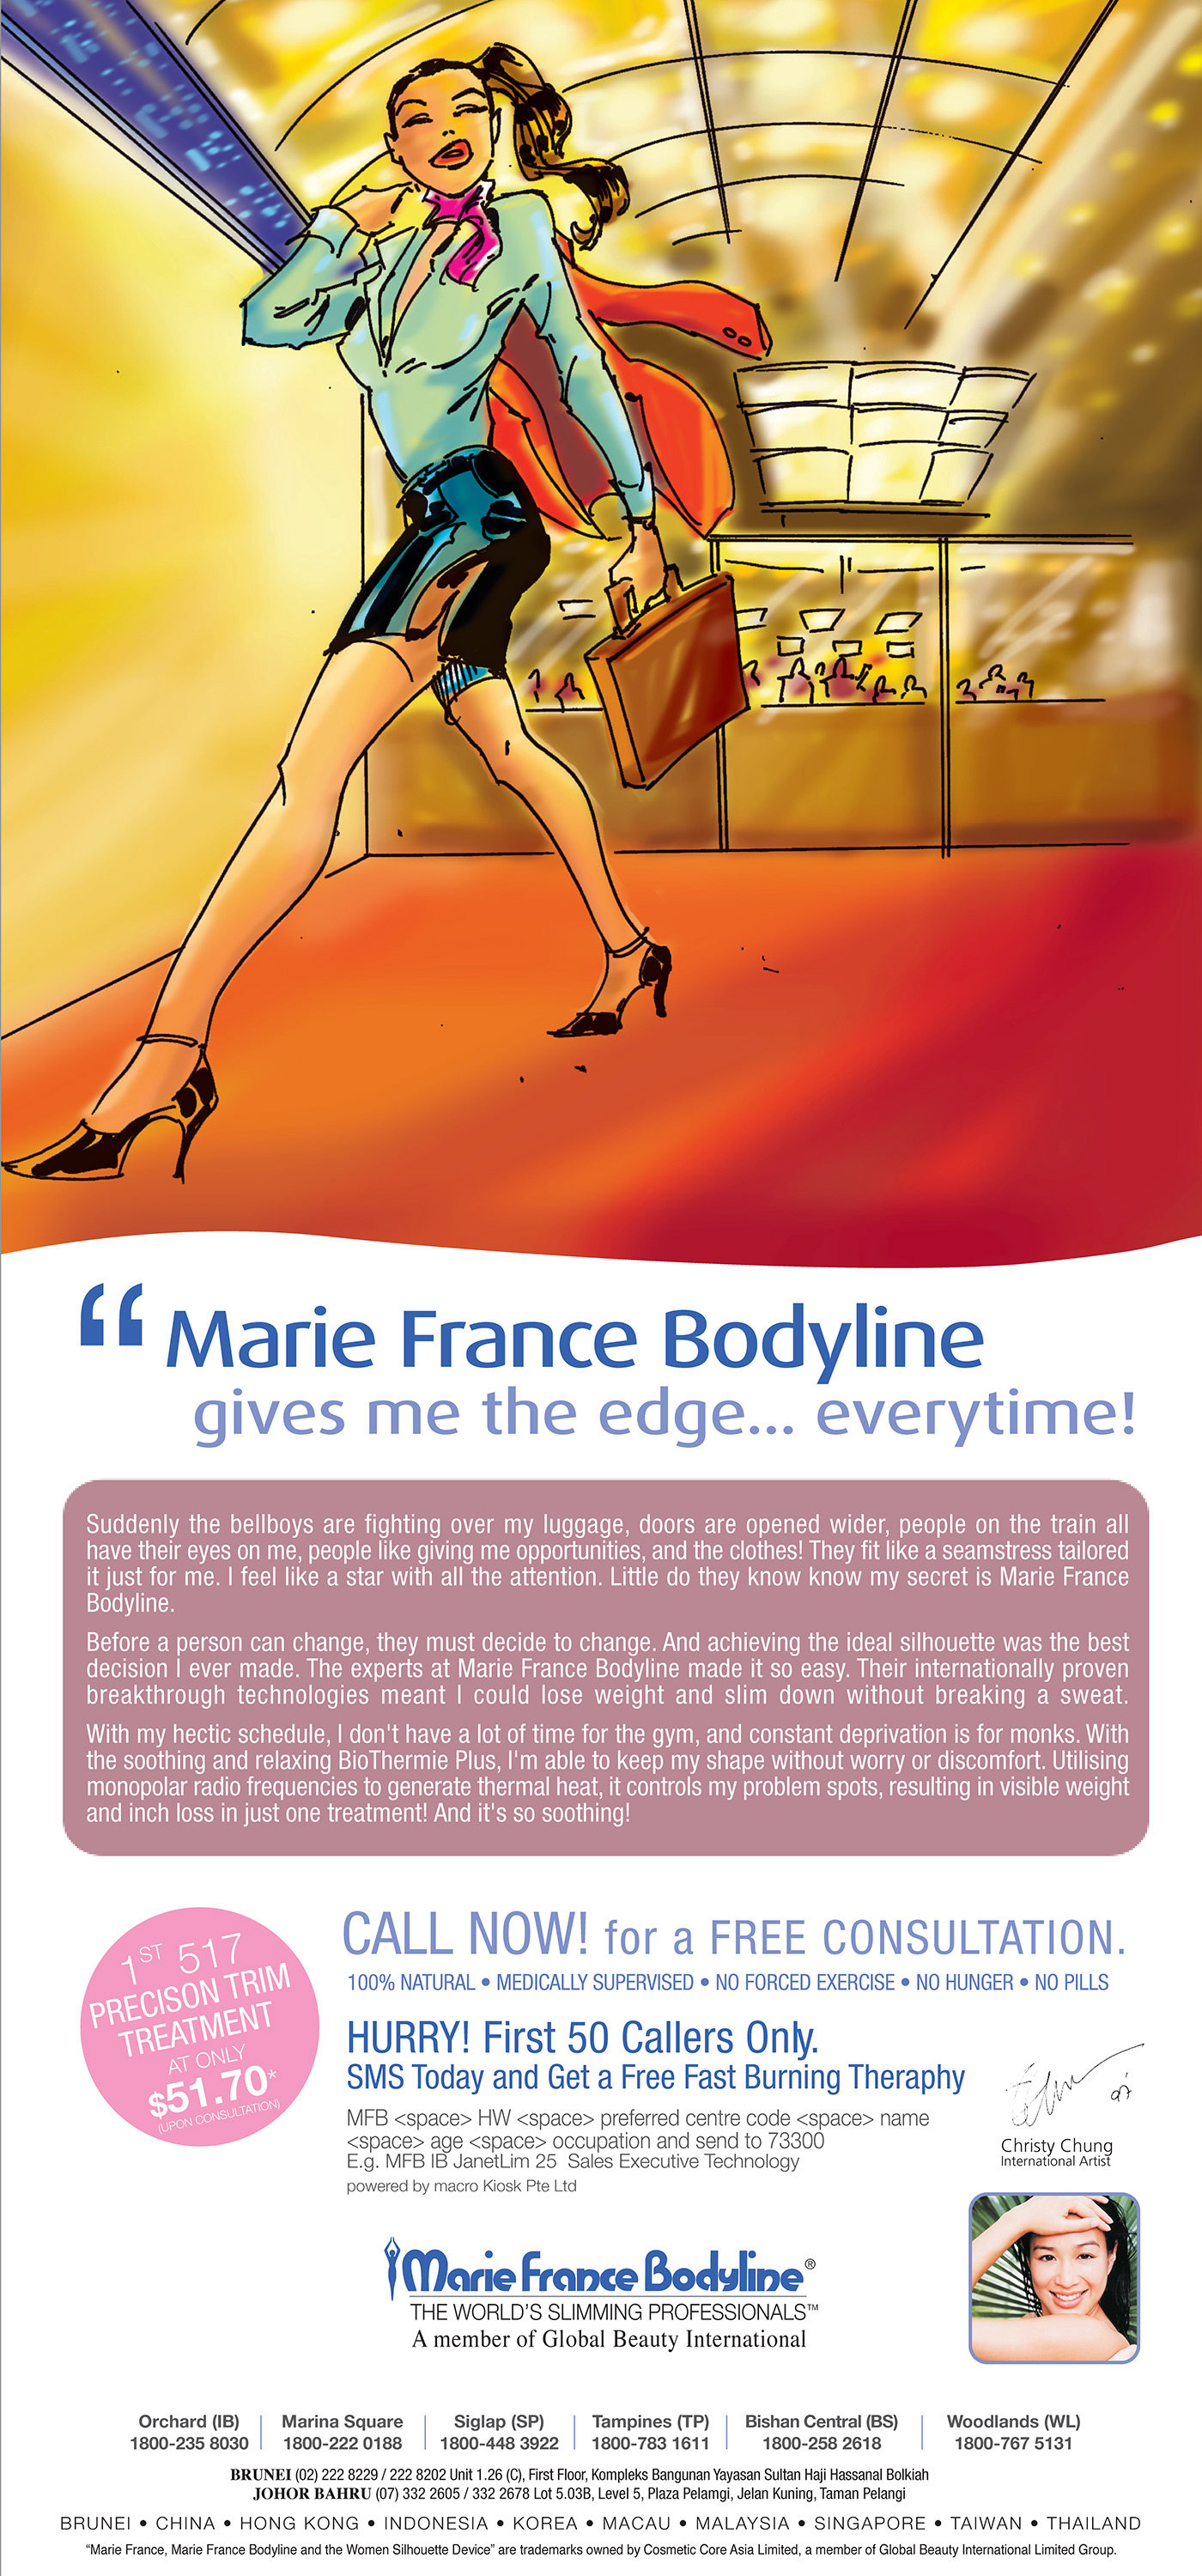 Advertising  campaign copywriting  marie france bodyline